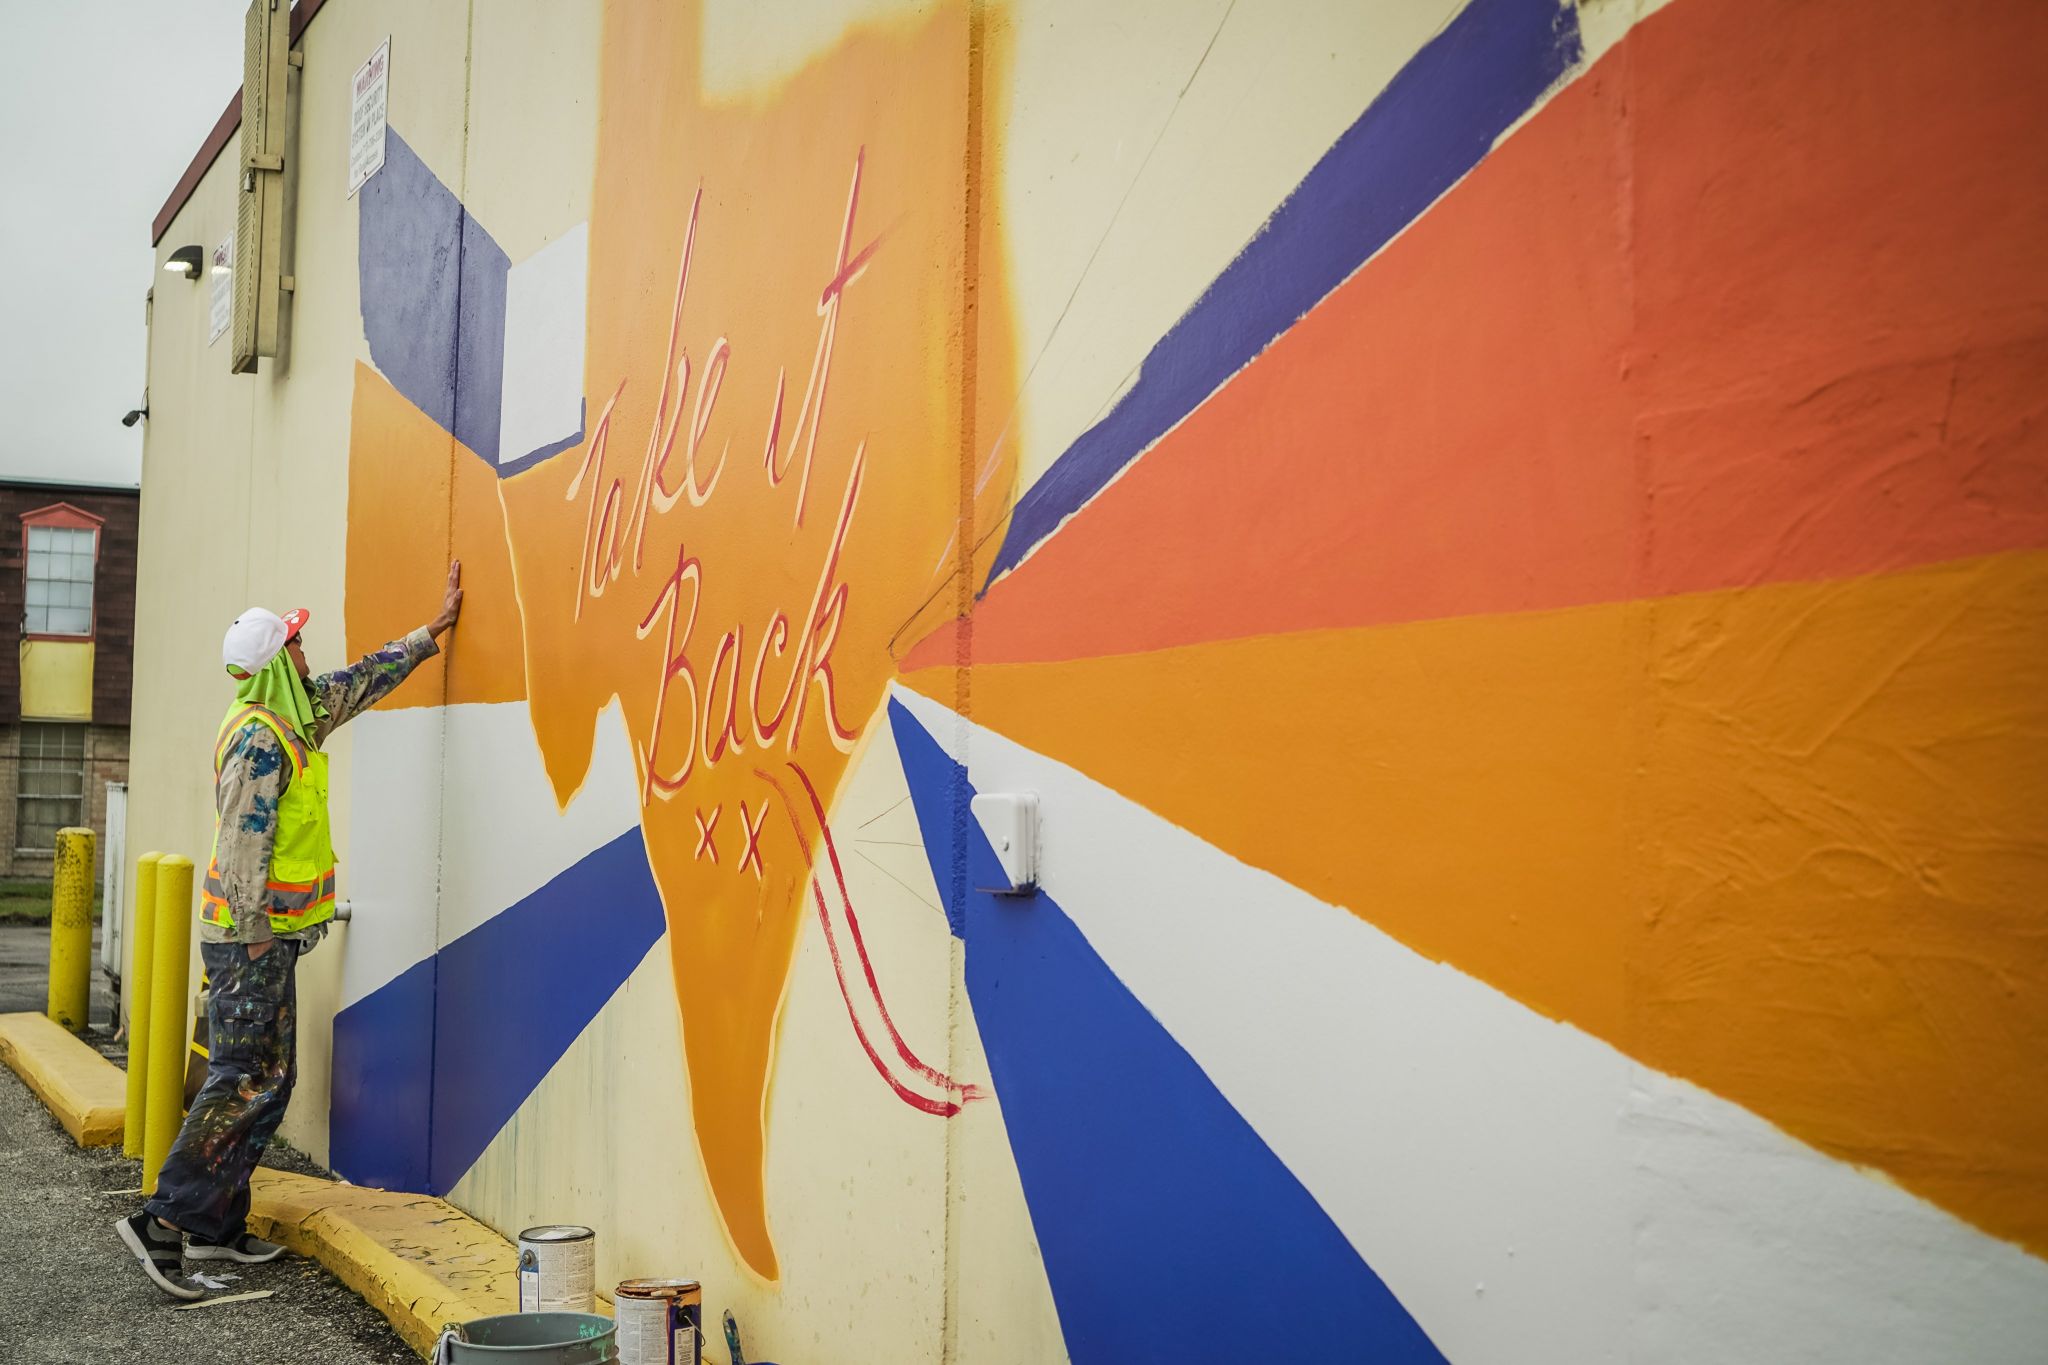 LEVELUP: Local artist celebrates Astros' 2022 postseason with mural